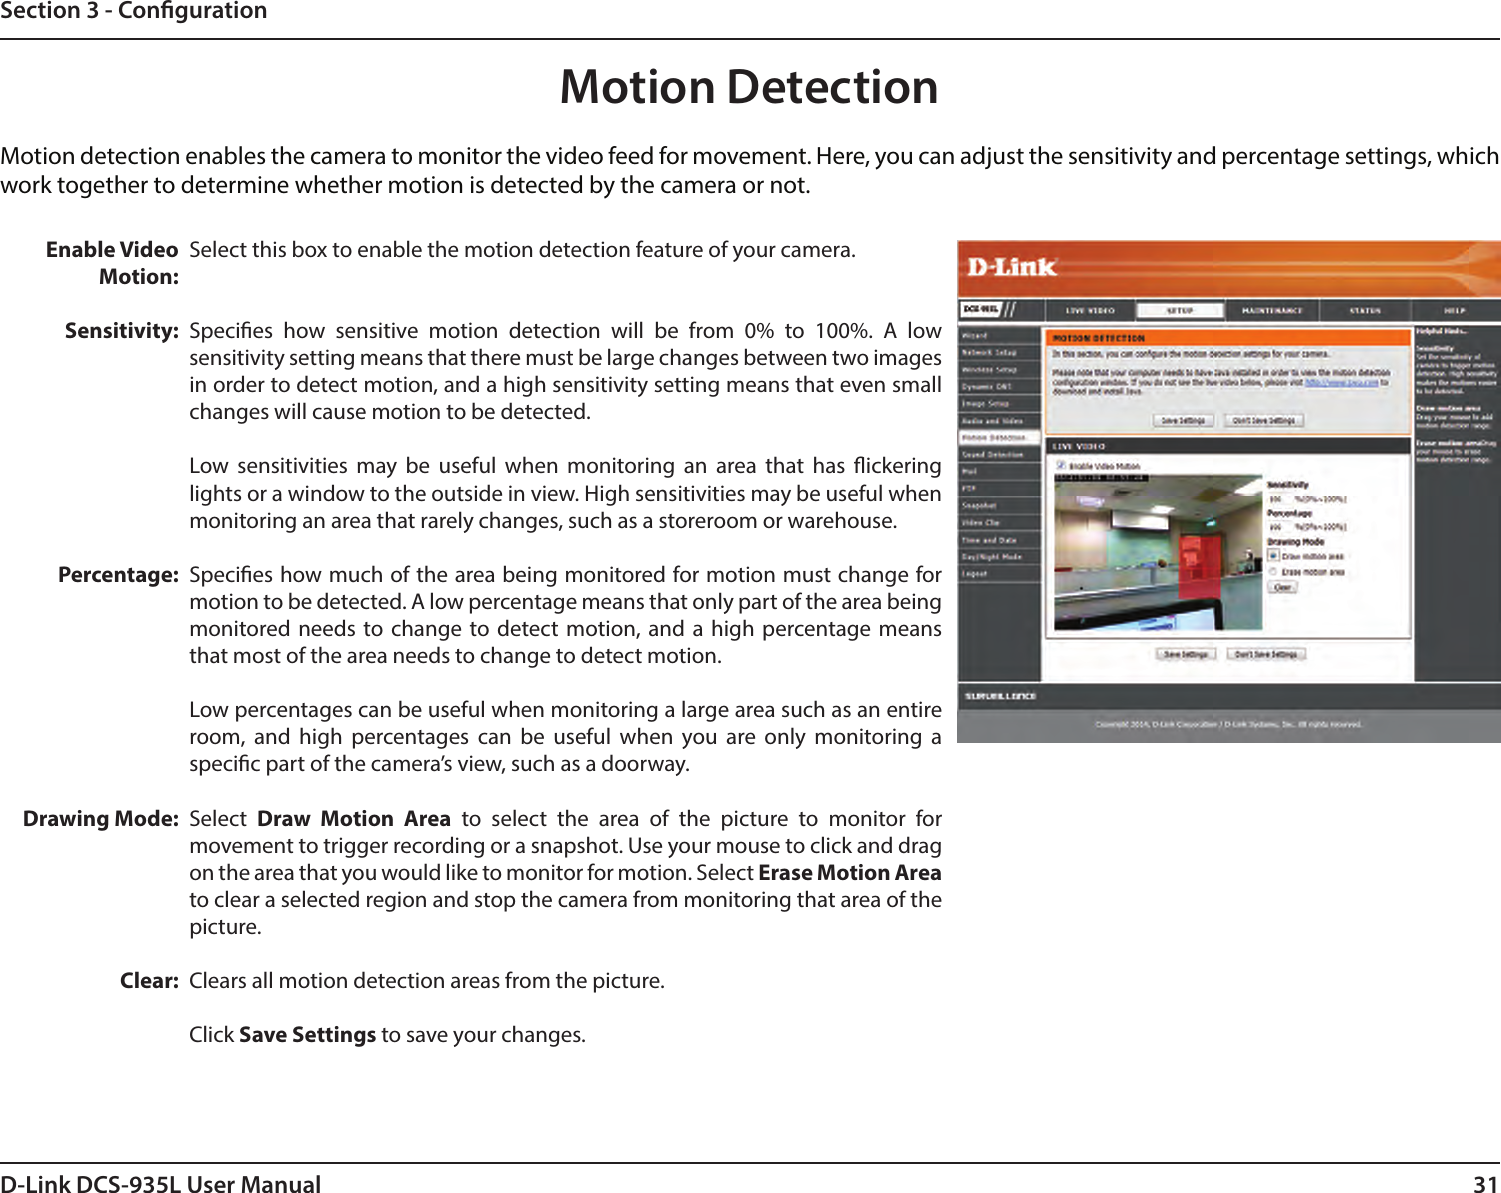 31D-Link DCS-935L User ManualSection 3 - CongurationMotion DetectionMotion detection enables the camera to monitor the video feed for movement. Here, you can adjust the sensitivity and percentage settings, which work together to determine whether motion is detected by the camera or not.Enable Video Motion:Sensitivity:Percentage:Drawing Mode:Clear:Select this box to enable the motion detection feature of your camera.Species how sensitive motion detection will be from 0% to 100%. A low sensitivity setting means that there must be large changes between two images in order to detect motion, and a high sensitivity setting means that even small changes will cause motion to be detected.Low sensitivities may be useful when monitoring an area that has ickering lights or a window to the outside in view. High sensitivities may be useful when monitoring an area that rarely changes, such as a storeroom or warehouse.Species how much of the area being monitored for motion must change for motion to be detected. A low percentage means that only part of the area being monitored needs to change to detect motion, and a high percentage means that most of the area needs to change to detect motion. Low percentages can be useful when monitoring a large area such as an entire room, and high percentages can be useful when you are only monitoring a specic part of the camera’s view, such as a doorway.Select  Draw Motion Area to select the area of the picture to monitor for movement to trigger recording or a snapshot. Use your mouse to click and drag on the area that you would like to monitor for motion. Select Erase Motion Area to clear a selected region and stop the camera from monitoring that area of the picture.Clears all motion detection areas from the picture.Click Save Settings to save your changes.